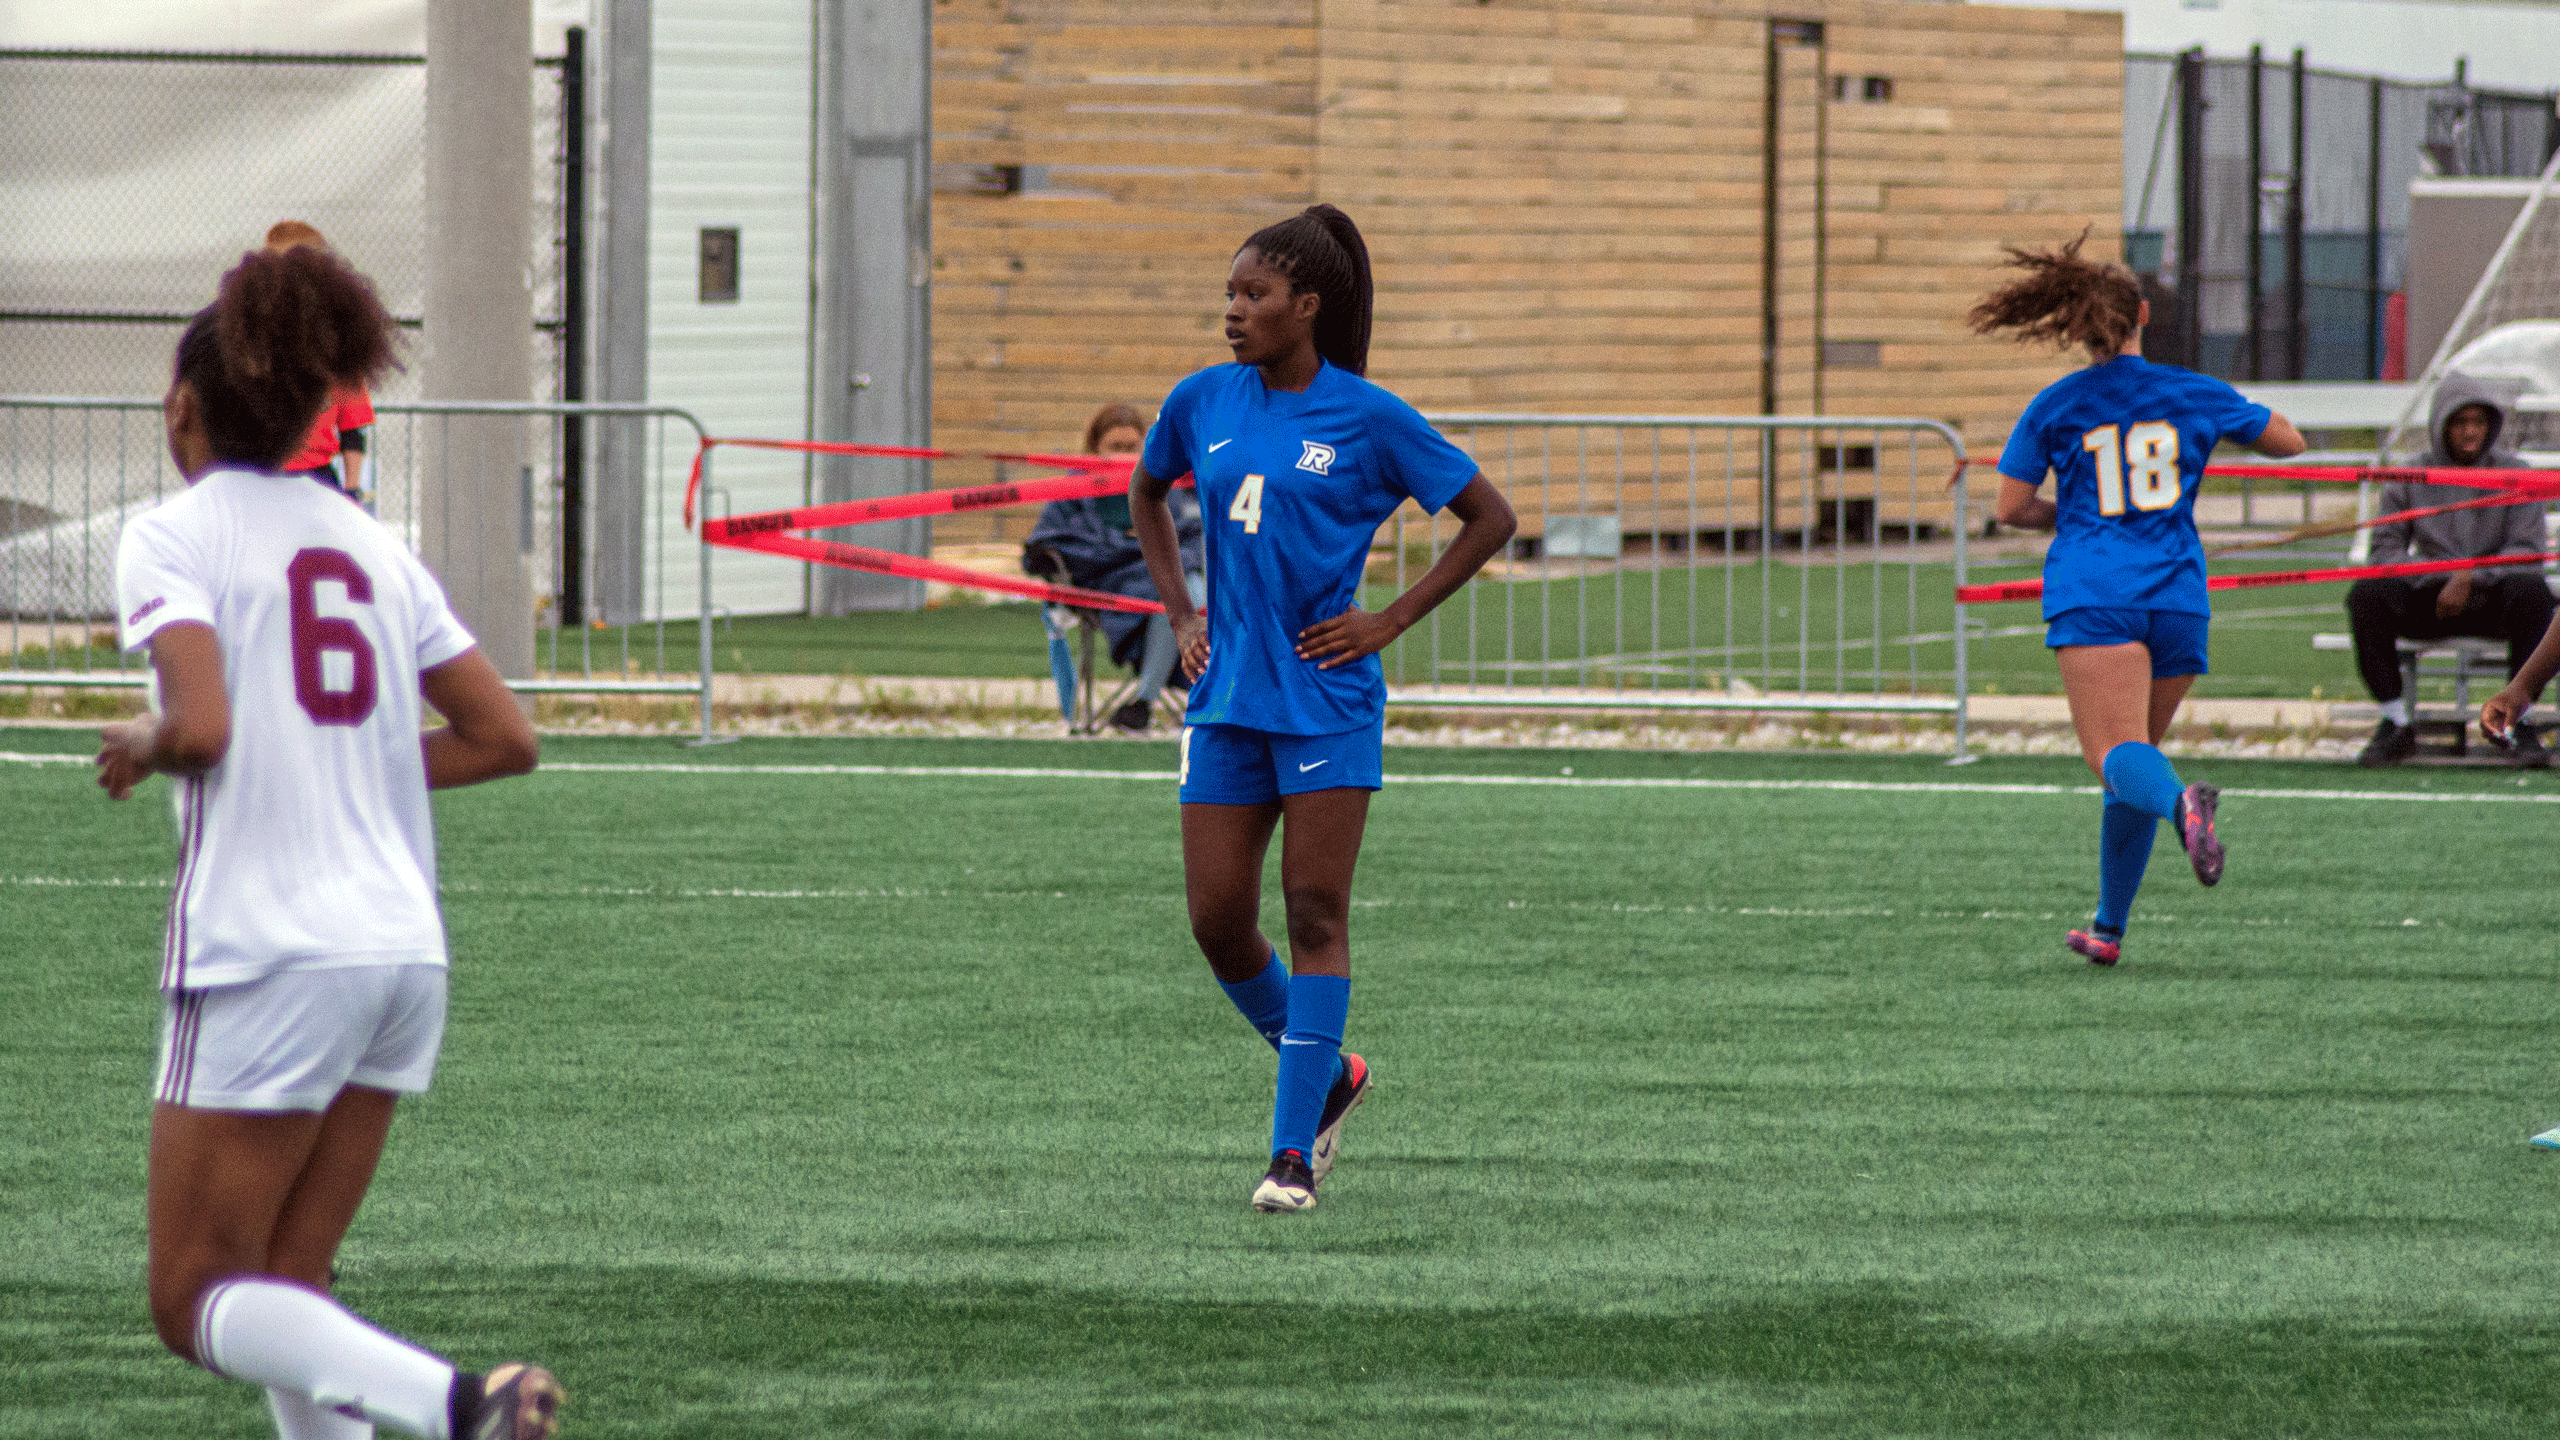 A TMU Bold women's soccer player in a blue jersey stands with their hands on their hips